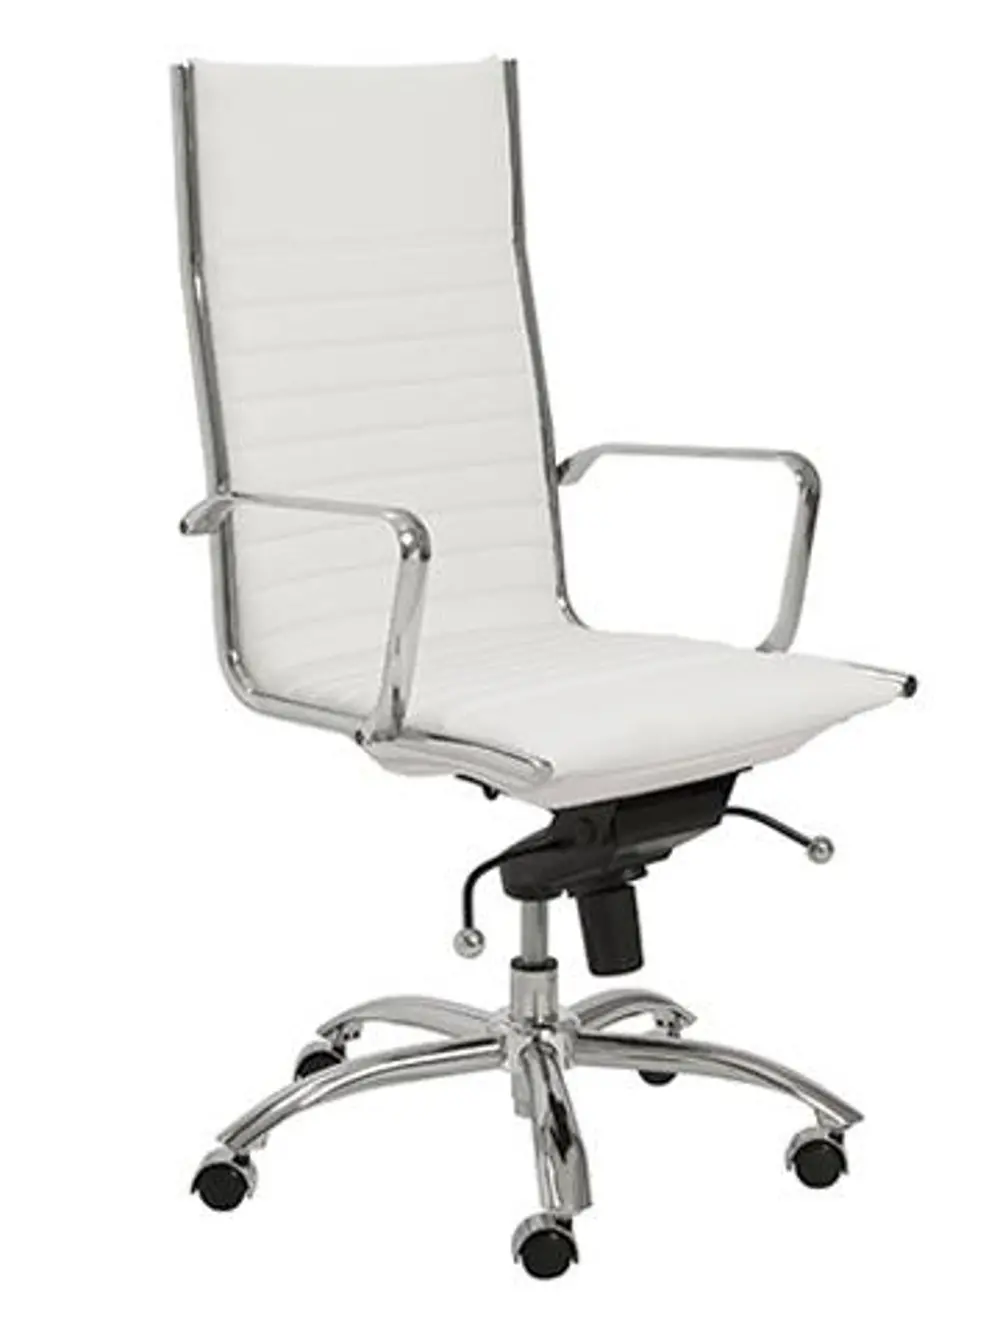 White High-Back Office Chair - Dirk -1